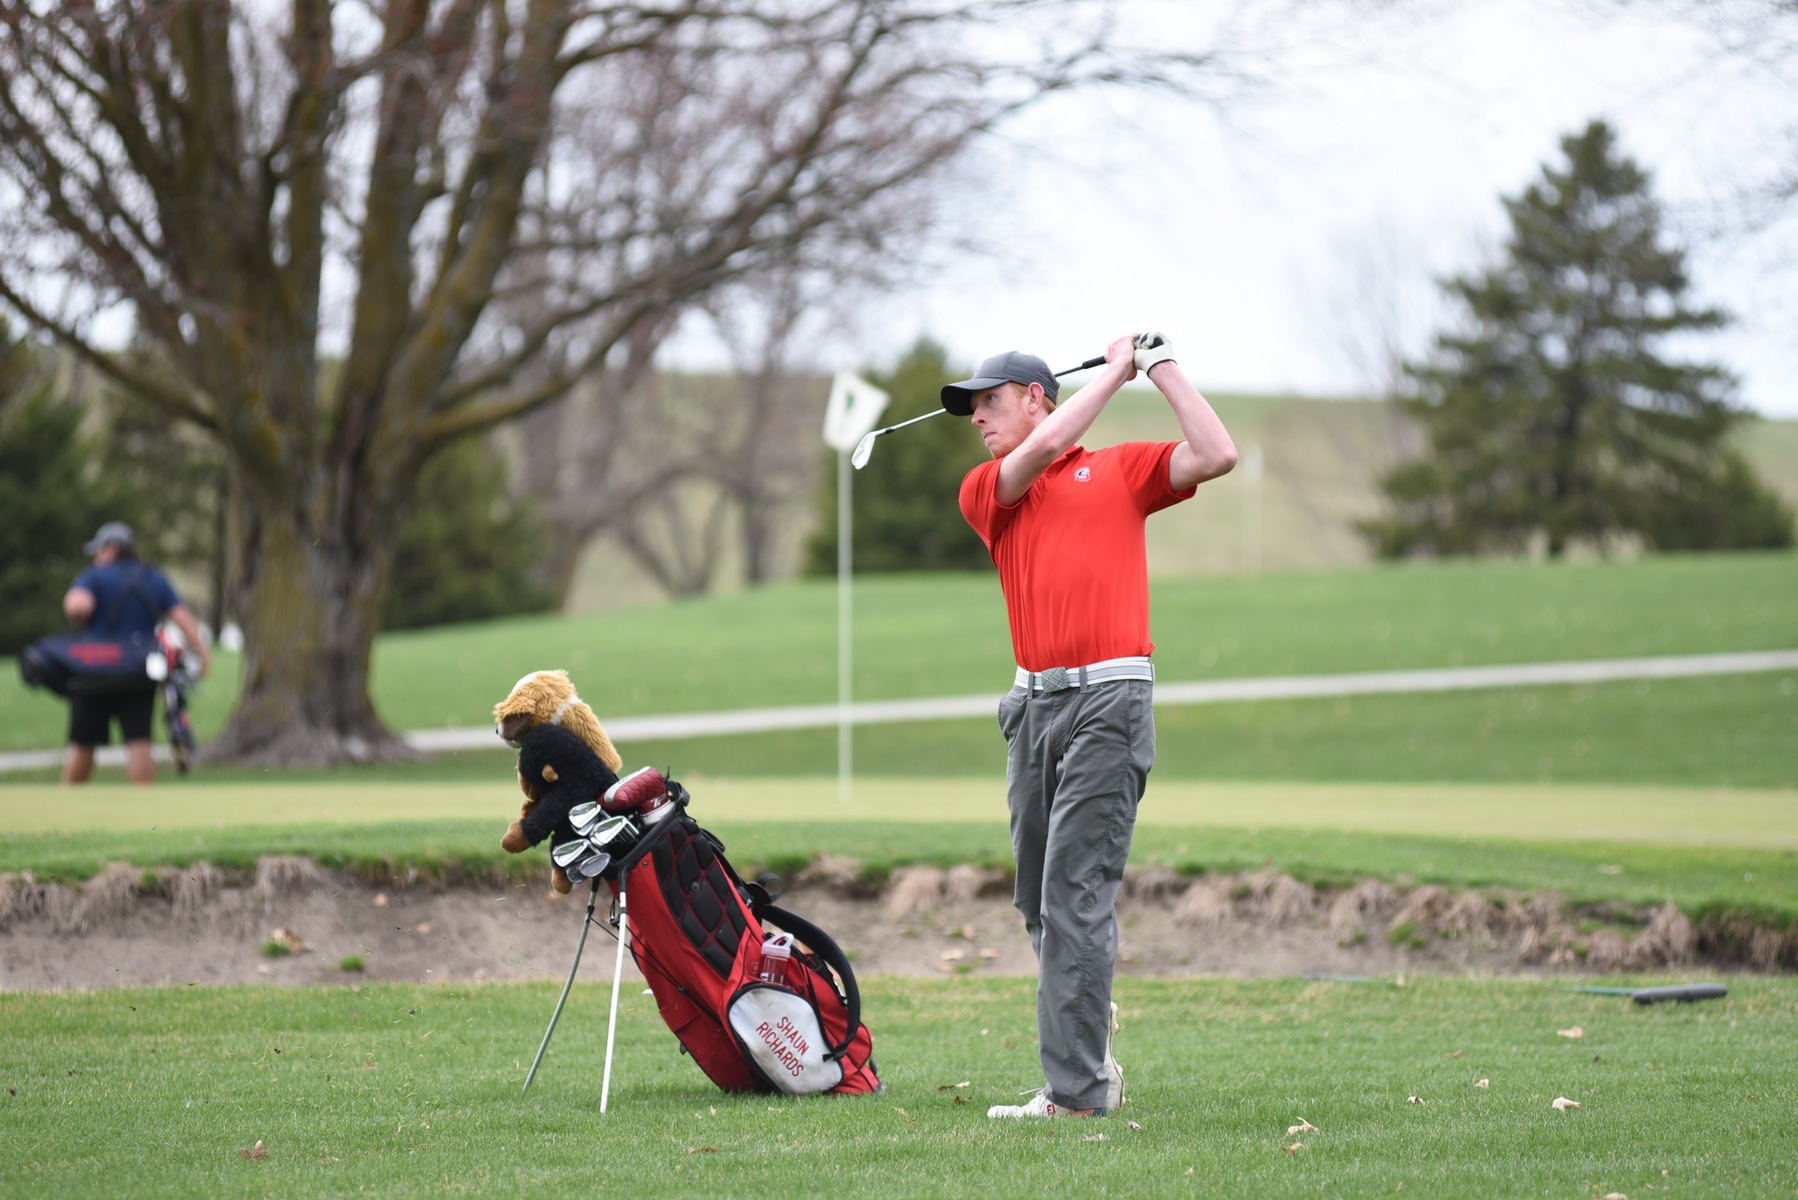 Southwestern sophomore Shaun Richards tied for second at the Iowa Central Spring Invite.